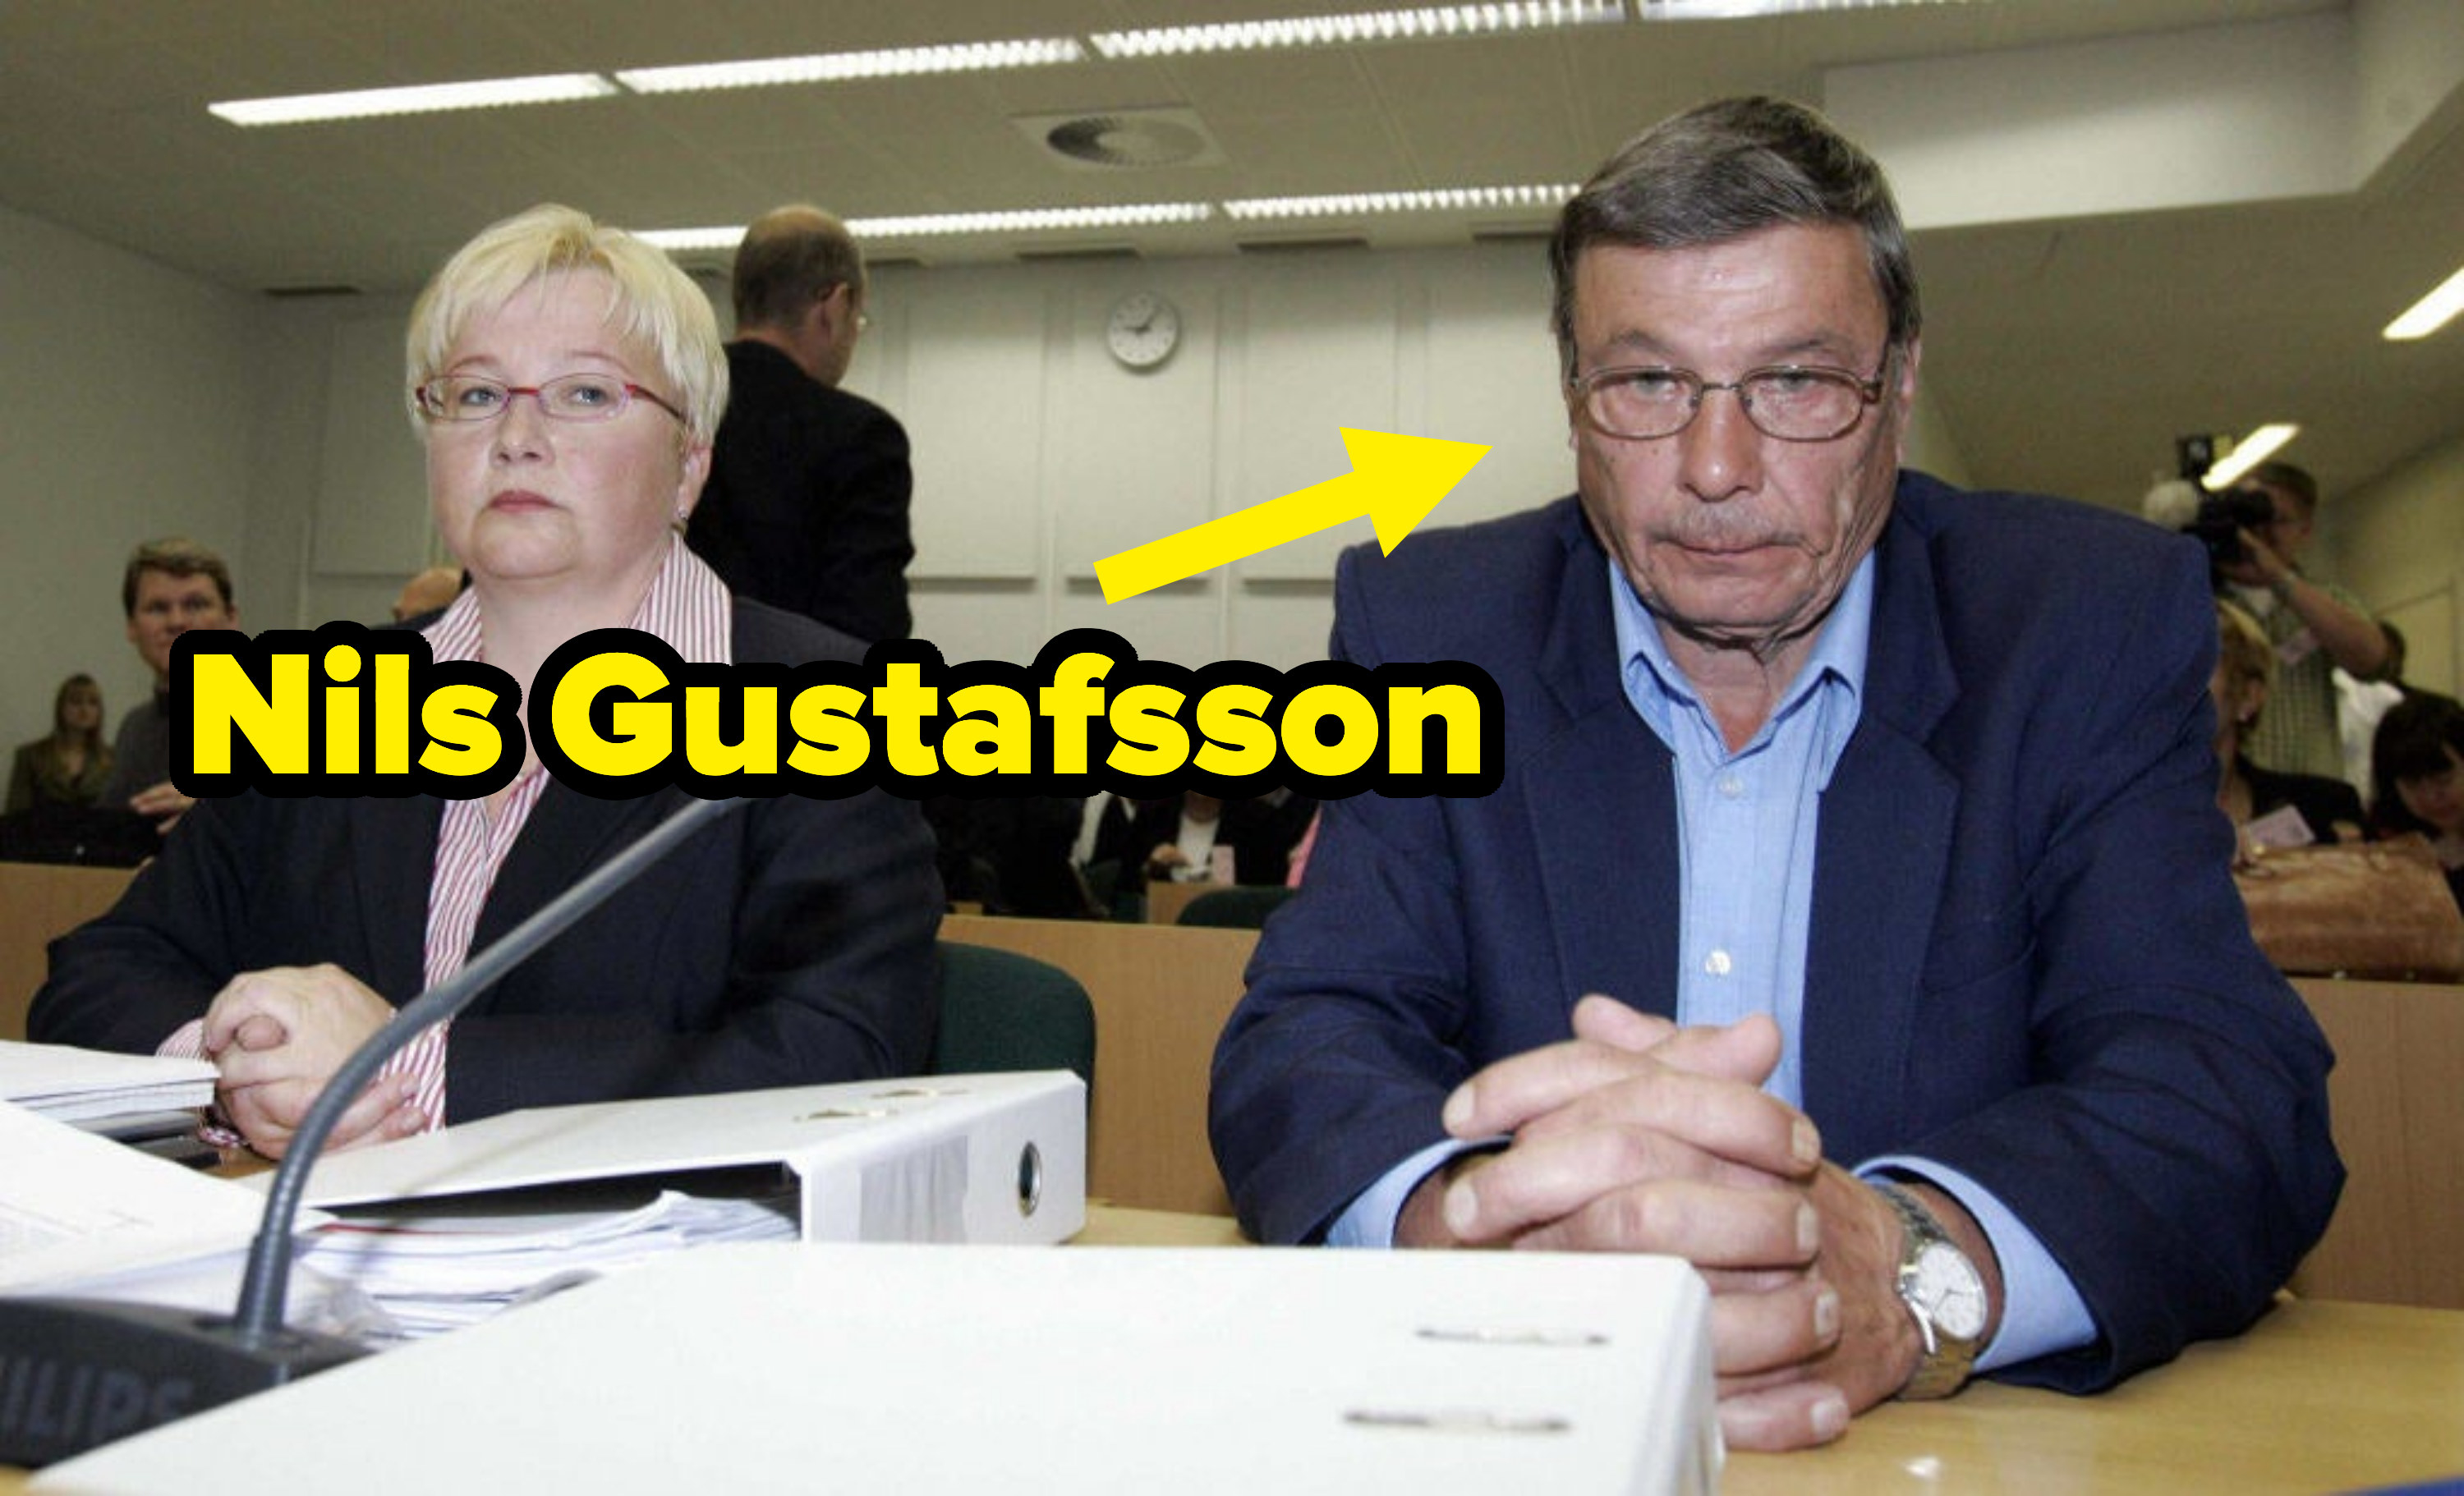 Nils Gustafsson in court with his lawyer